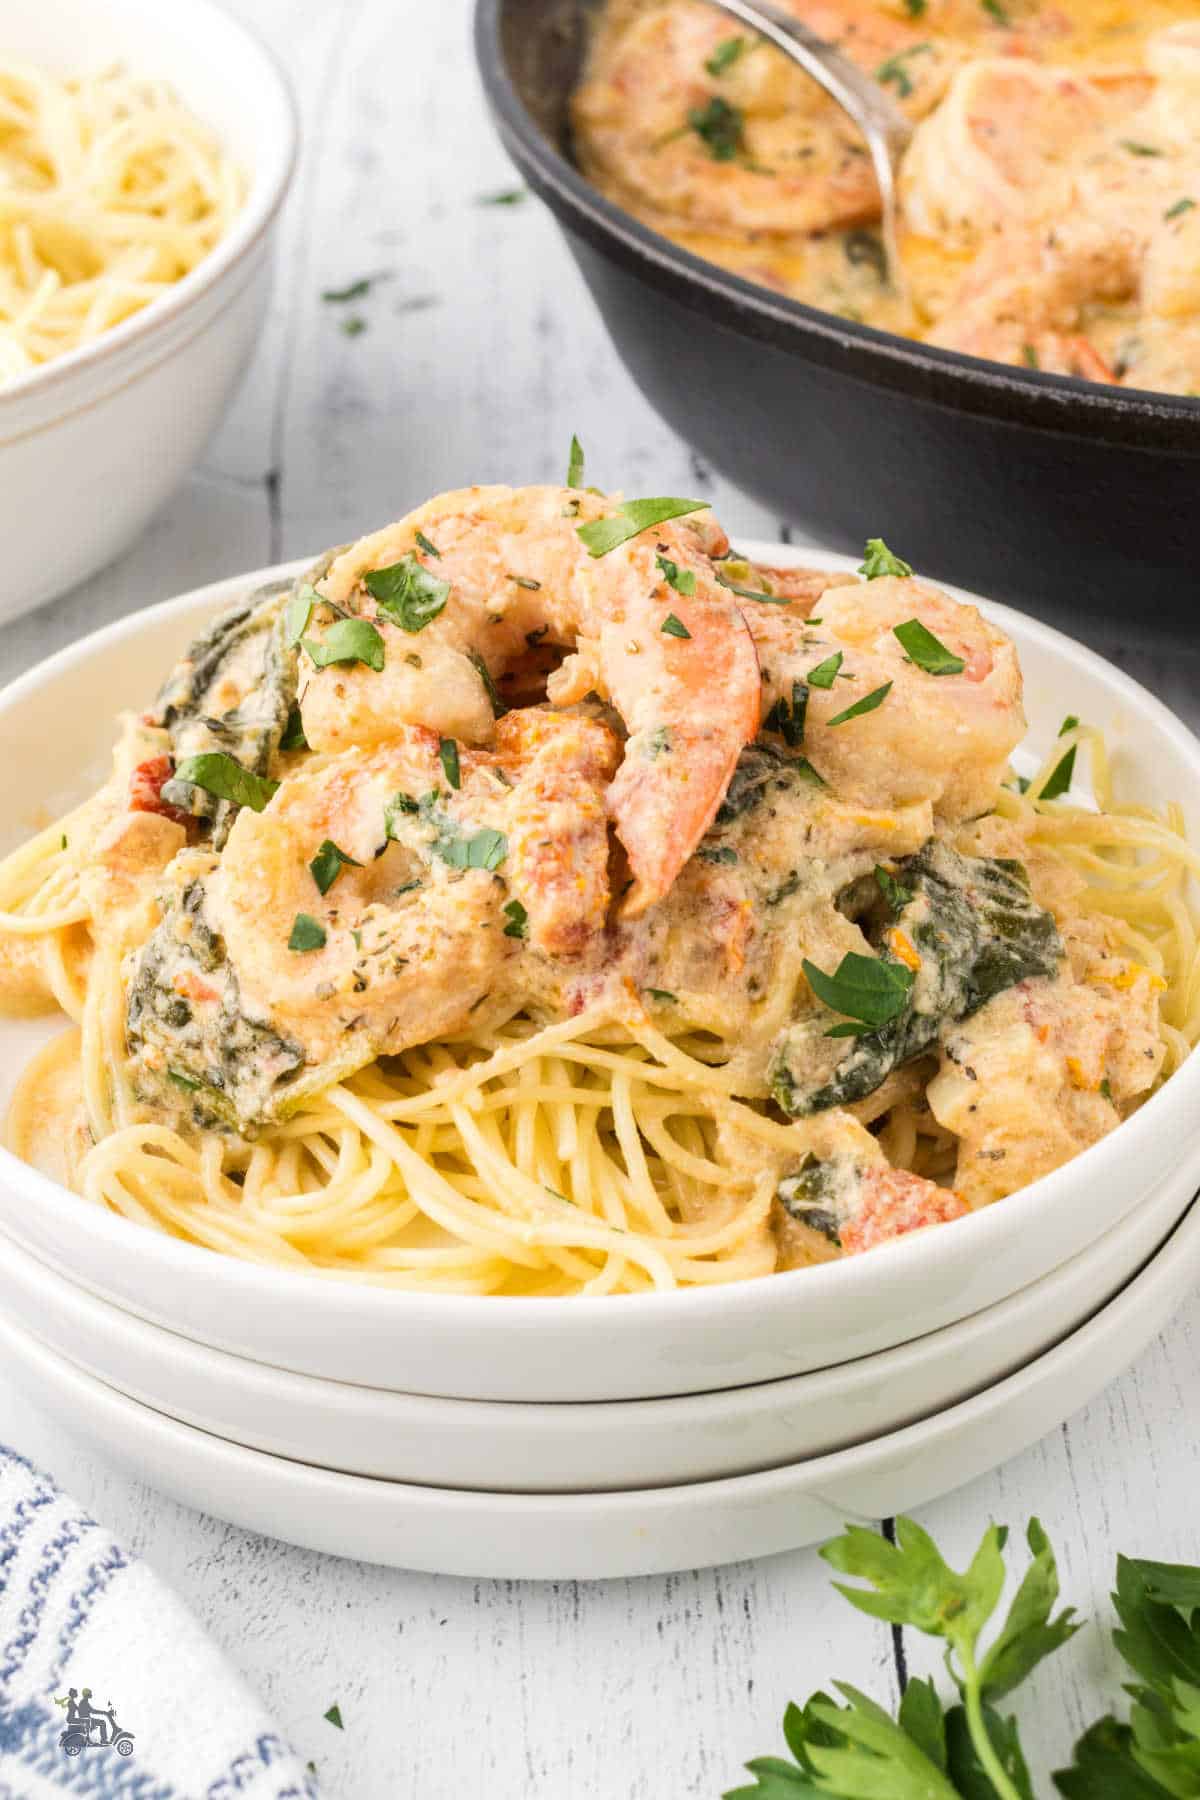 Spaghetti is served with creamy Tuscan shrimp garnished with chopped parsley.
